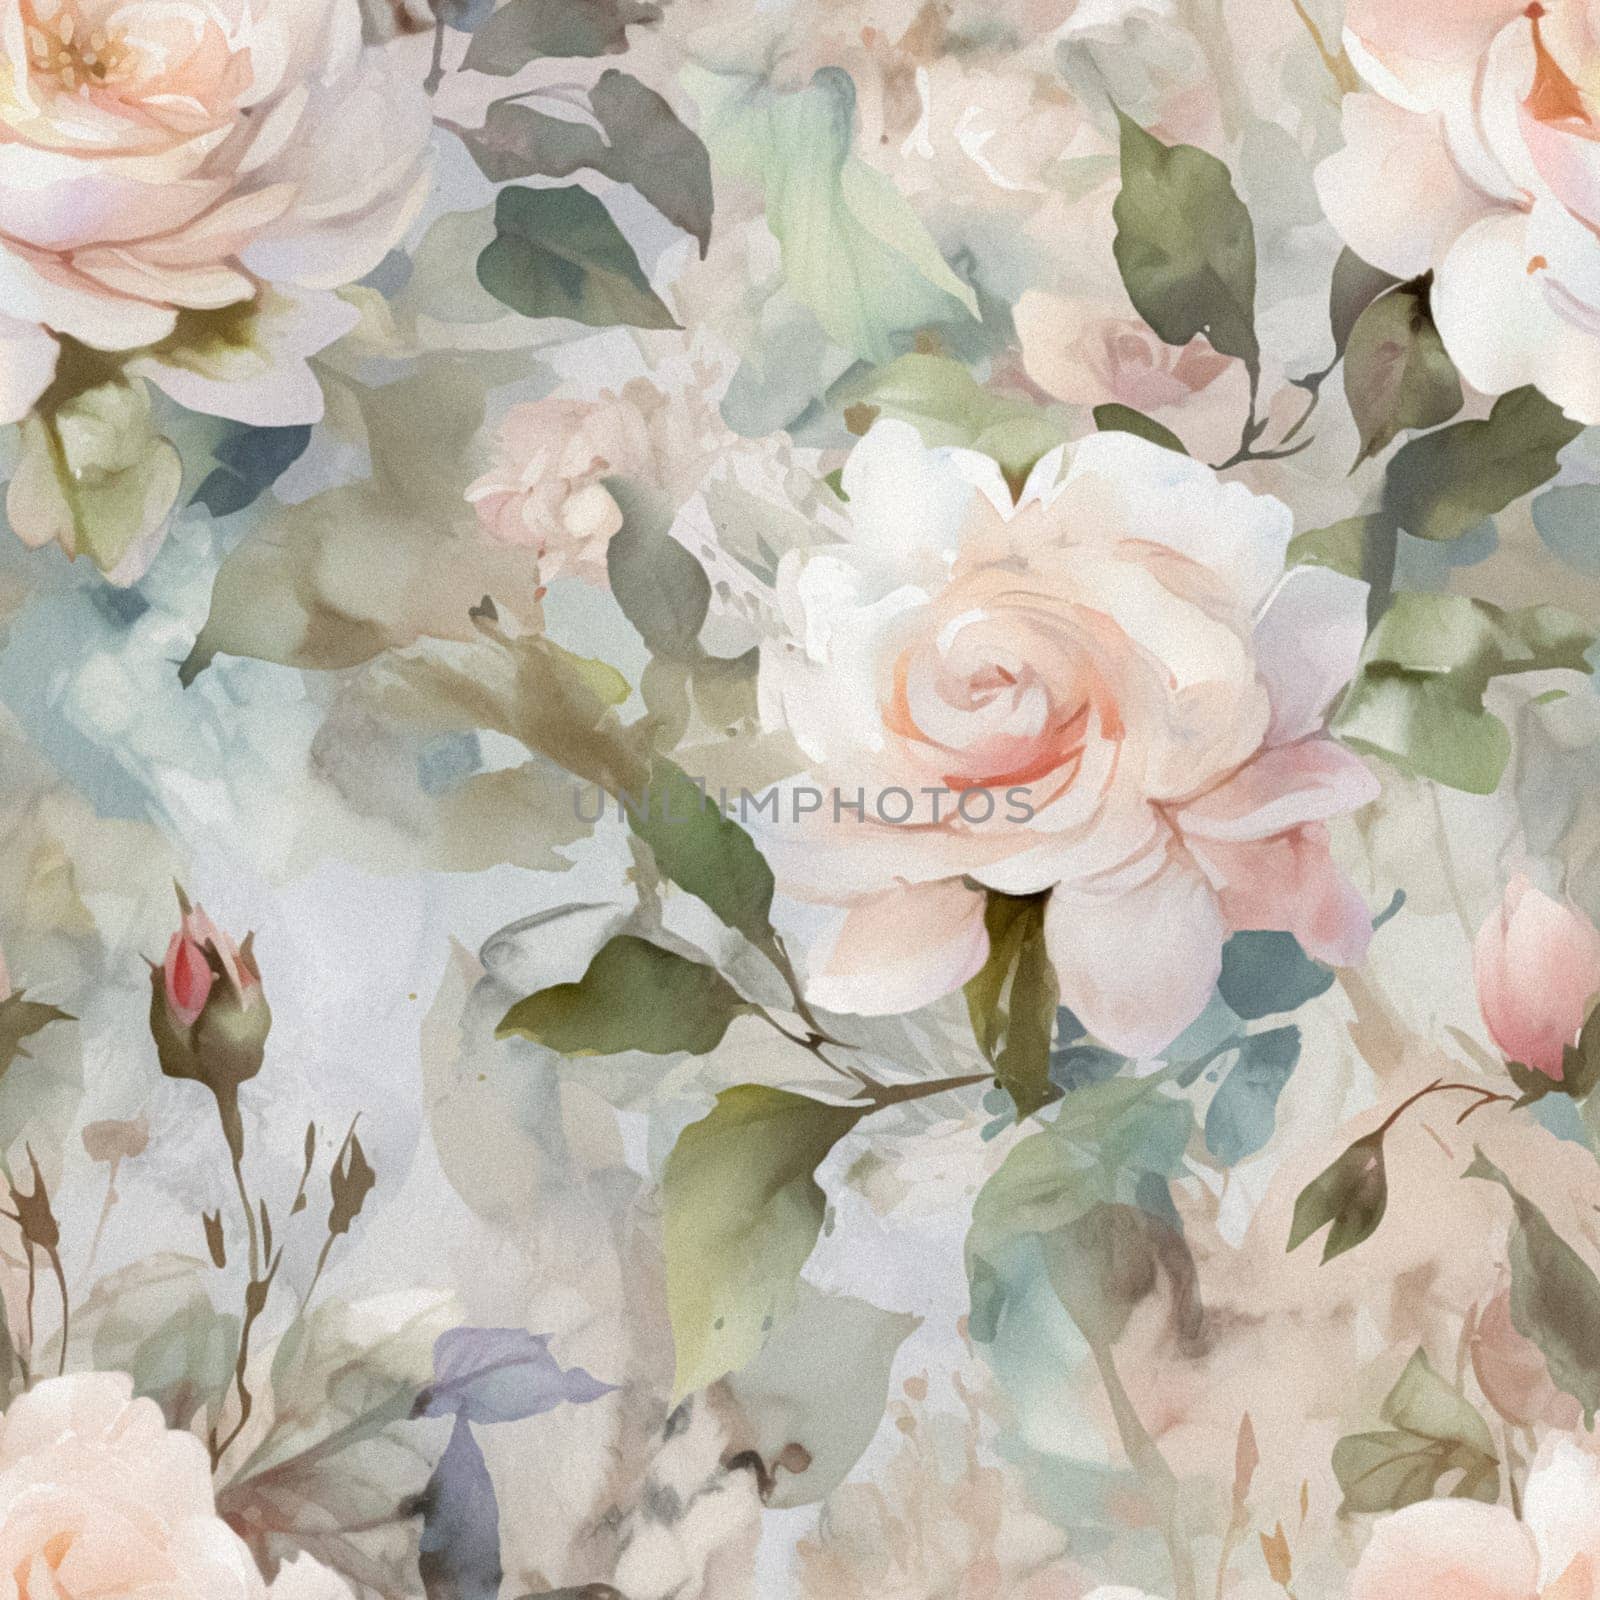 Floral fine art, romantic flowers in soft pastel colours, evoking a sense of tranquility and natural beauty, printable art by Anneleven